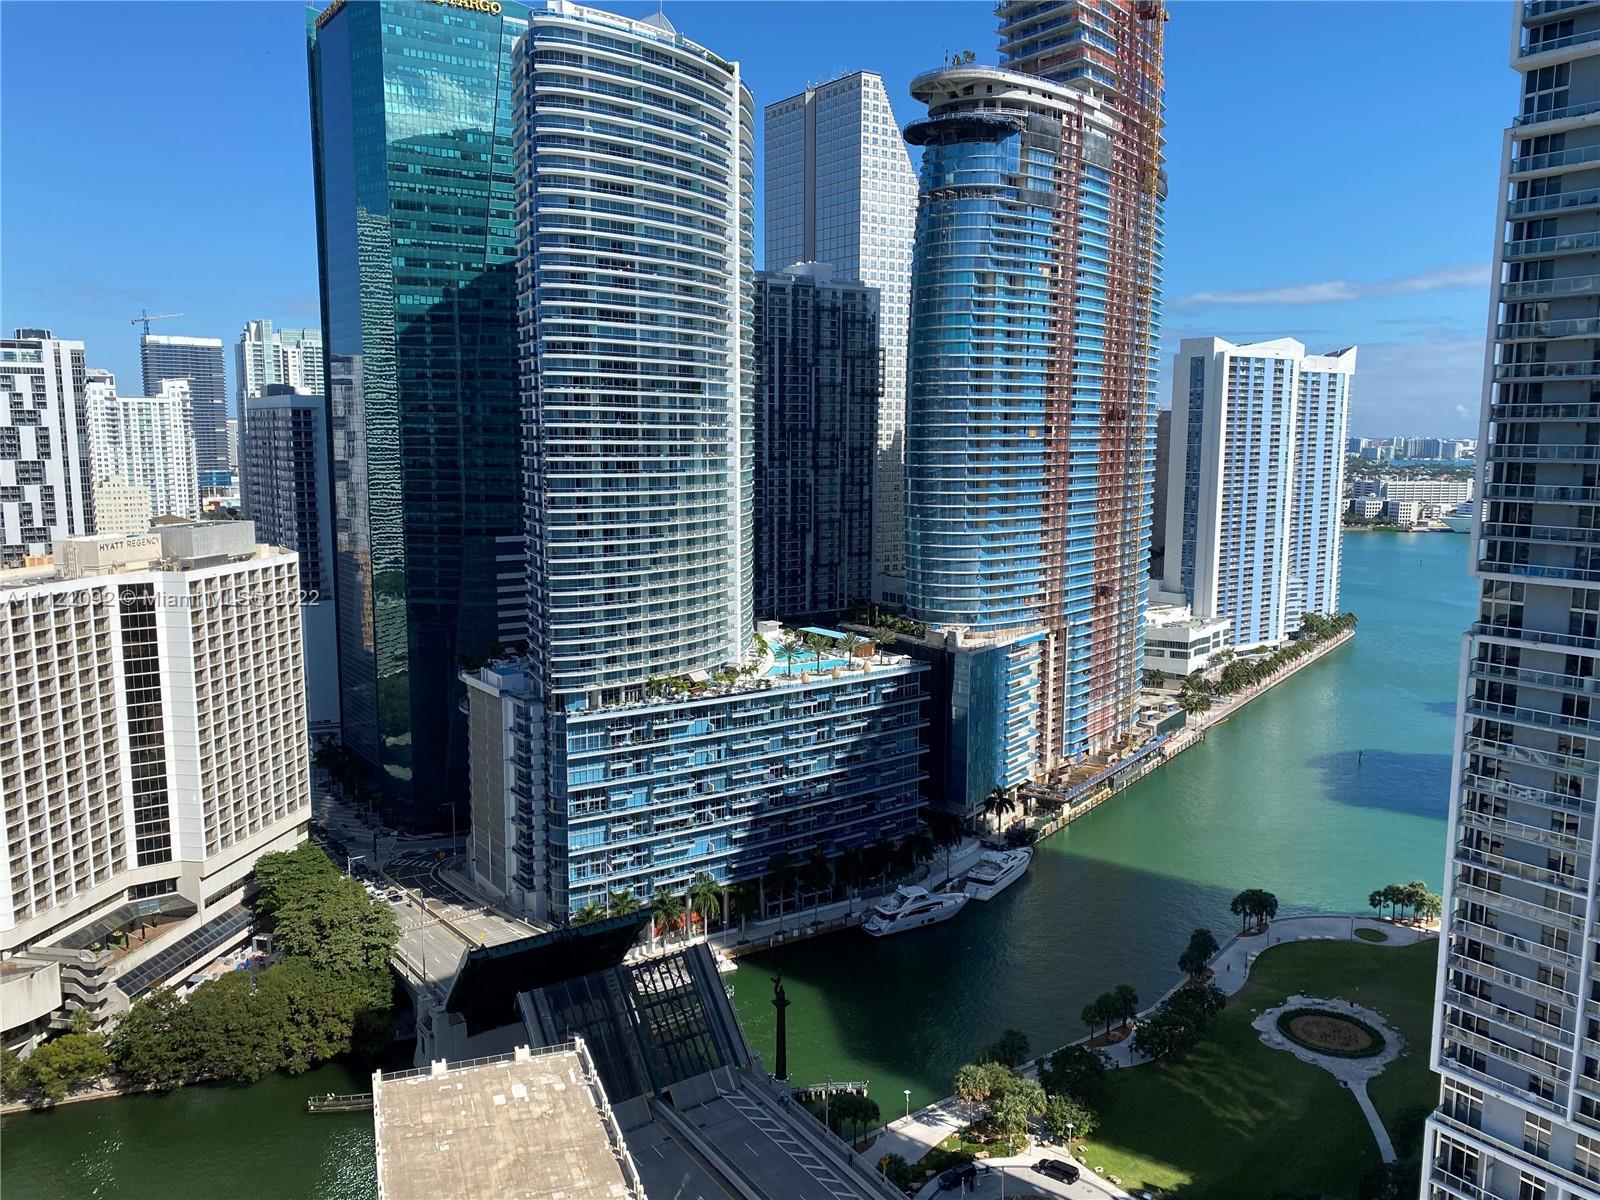 Amazing 2/2 apartment in the trendy 500 Brickell, a residential complex in the Brickell neighborhood